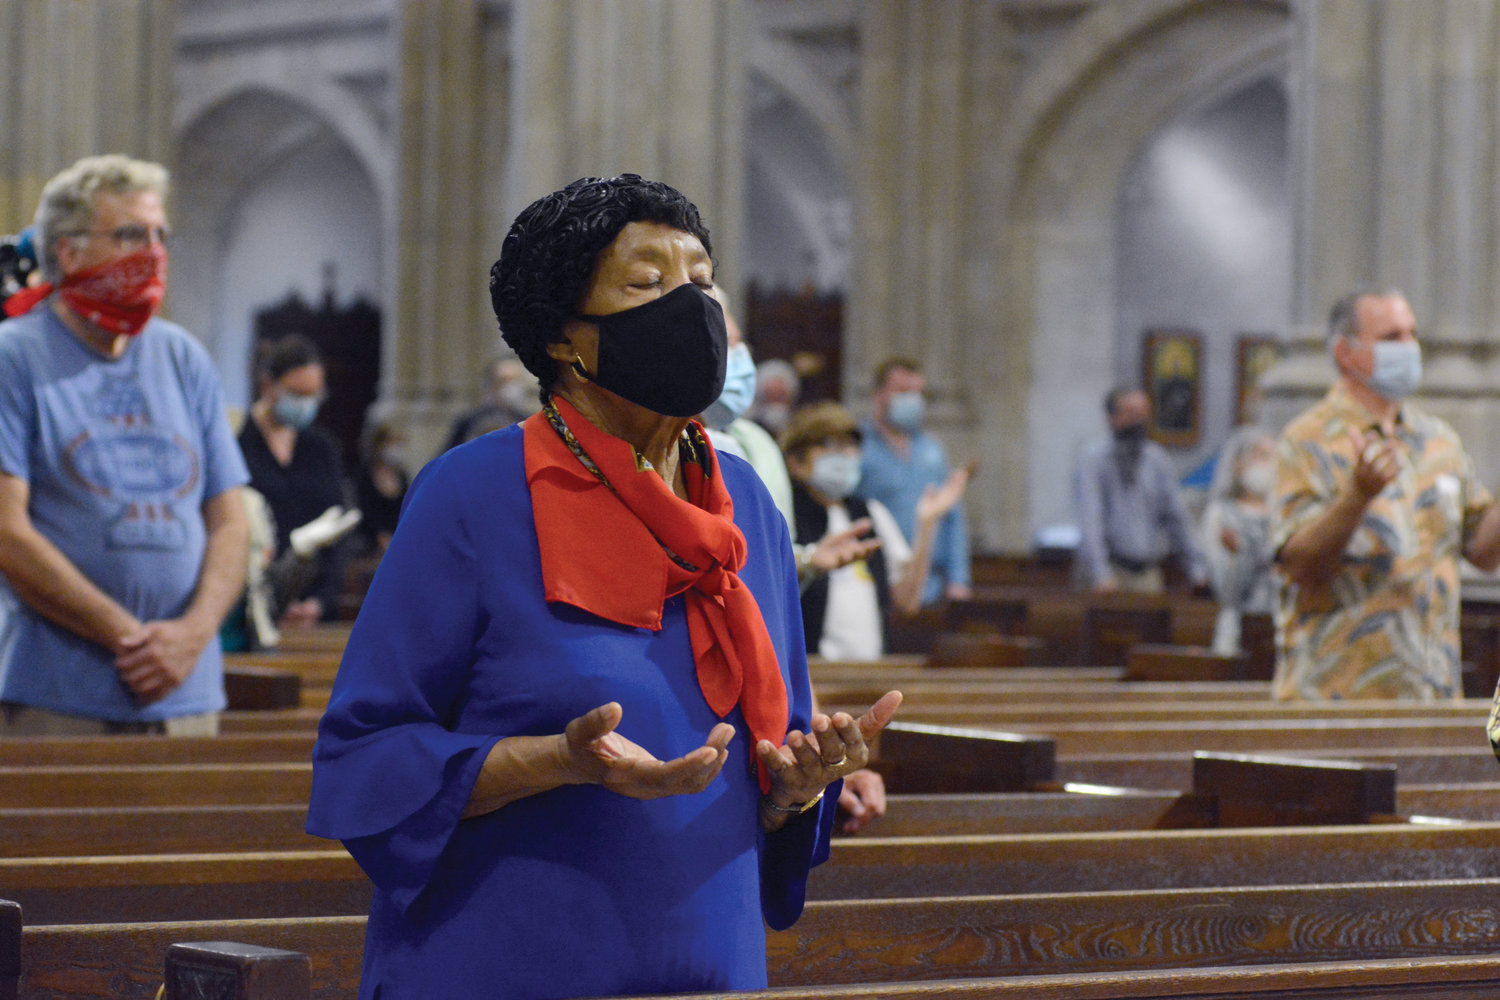 The faithful maintain required social distance in the pews and wear protective face coverings as they pray during the 10:15 a.m. Mass June 28 in St. Patrick’s Cathedral.